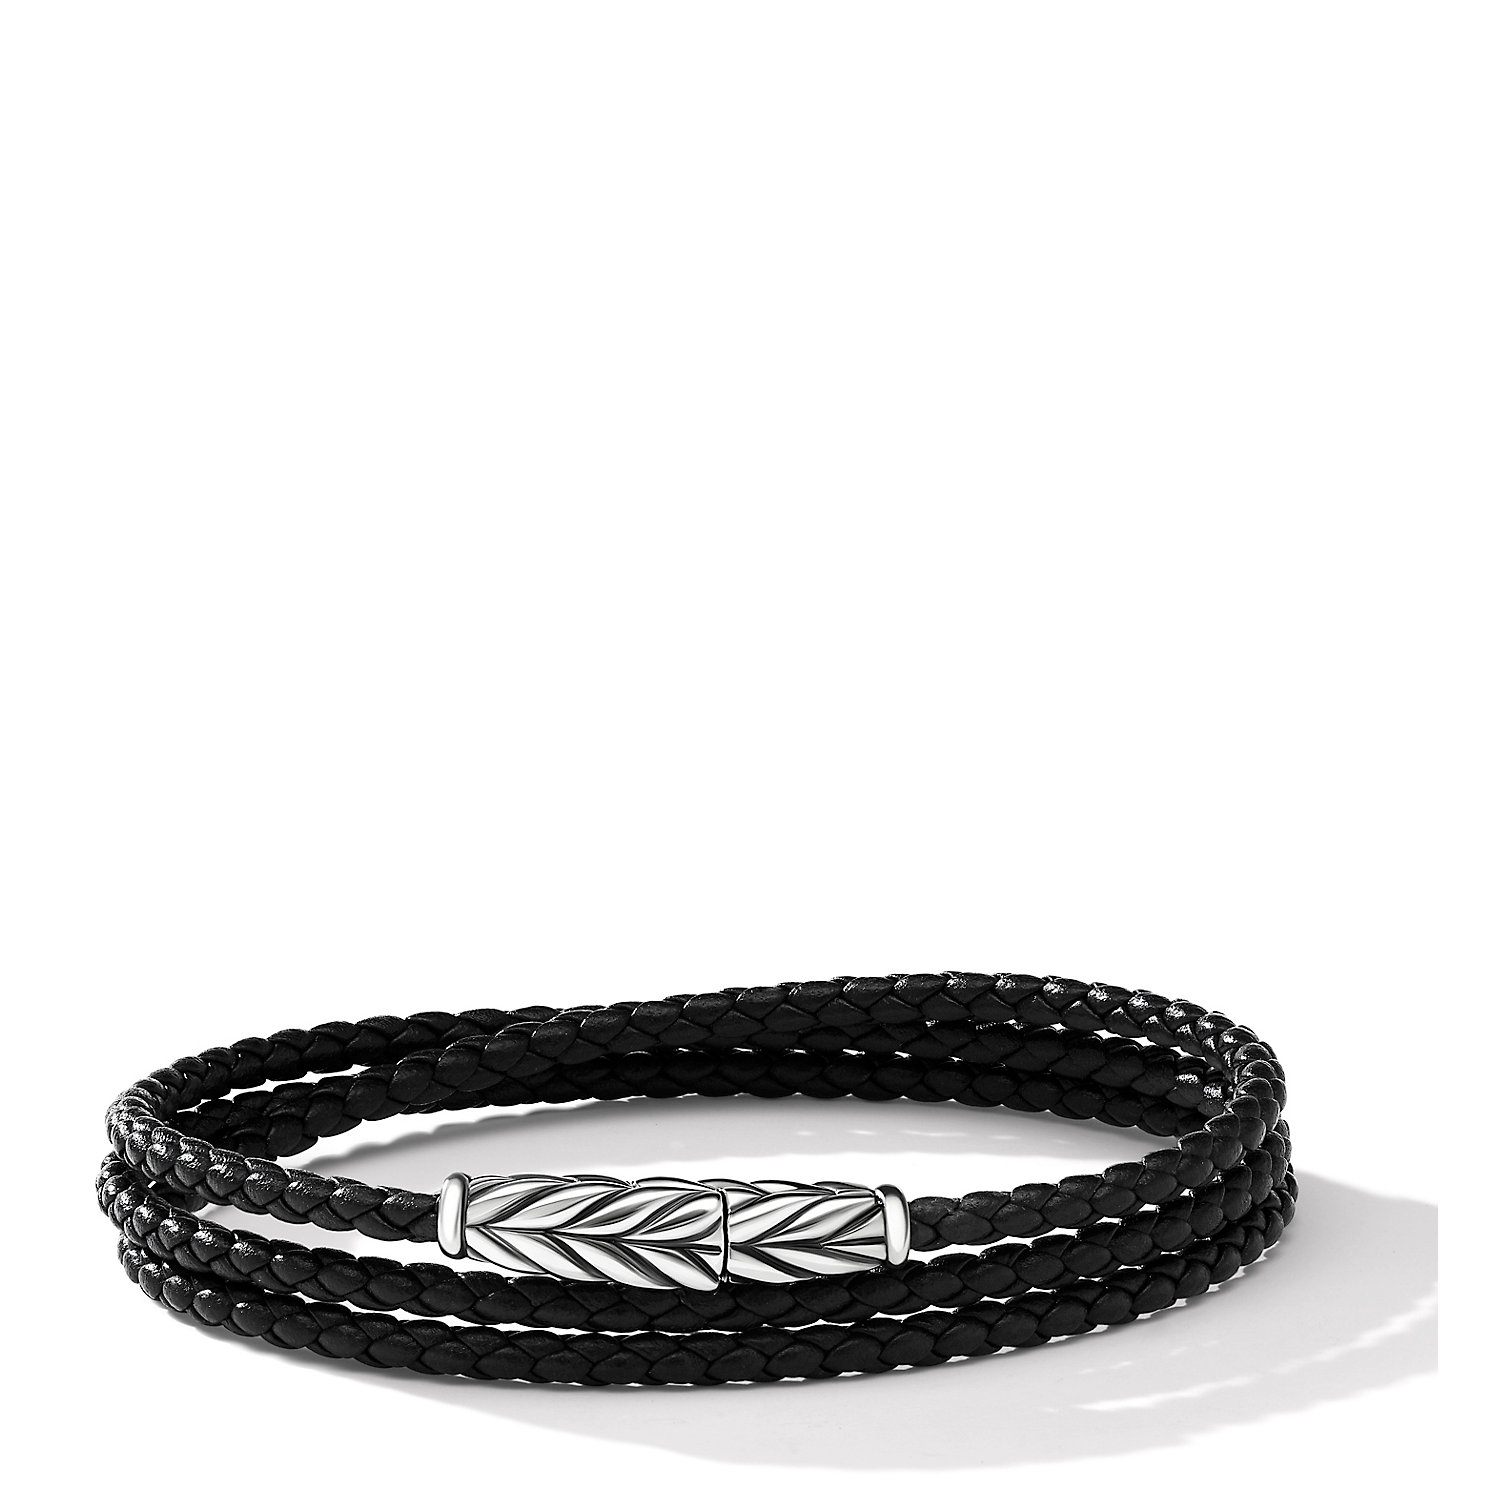 Chevron Triple Wrap Bracelet in Black Leather and Sterling Silver, 3mm